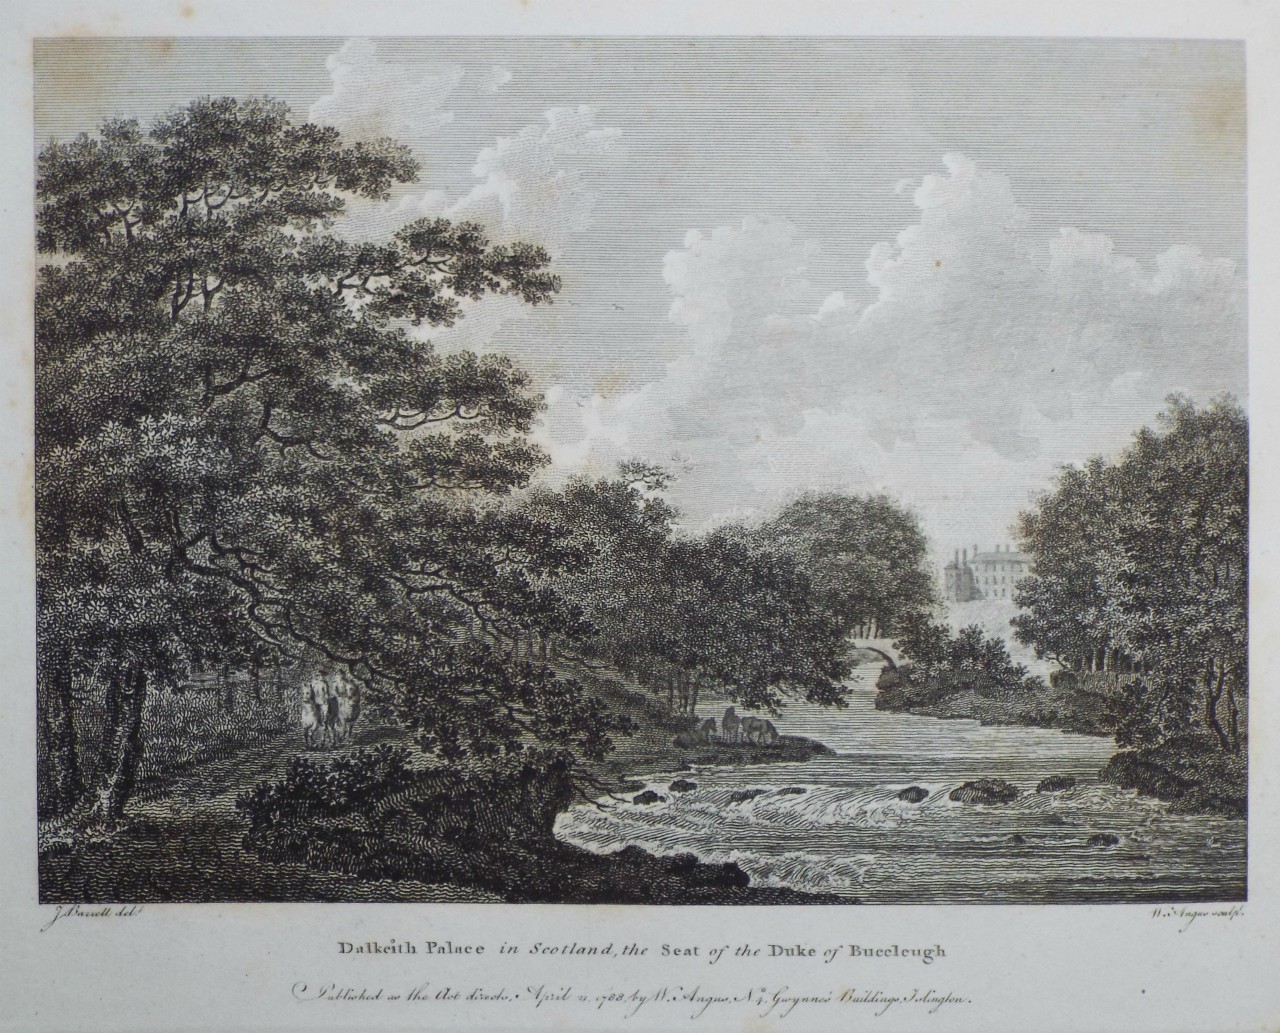 Print - Dalkeith Palace in Scotland, the Seat of the Duke of Buccleugh. - Angus